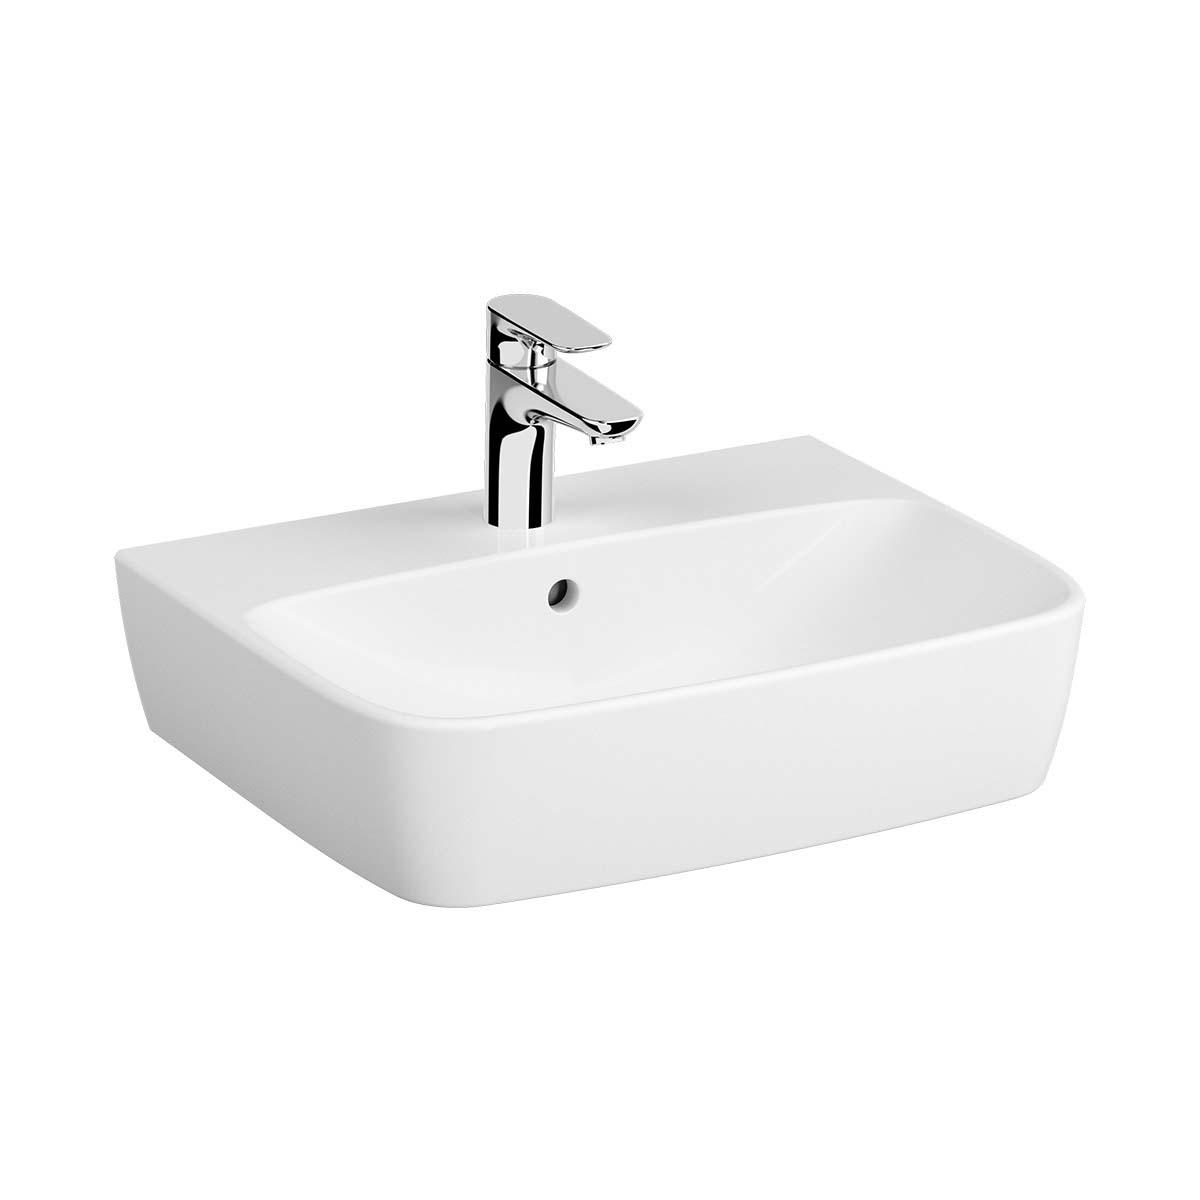 Washbasin, 55 cm, One Tap Hole, With Overflow Hole, For Countertop Use